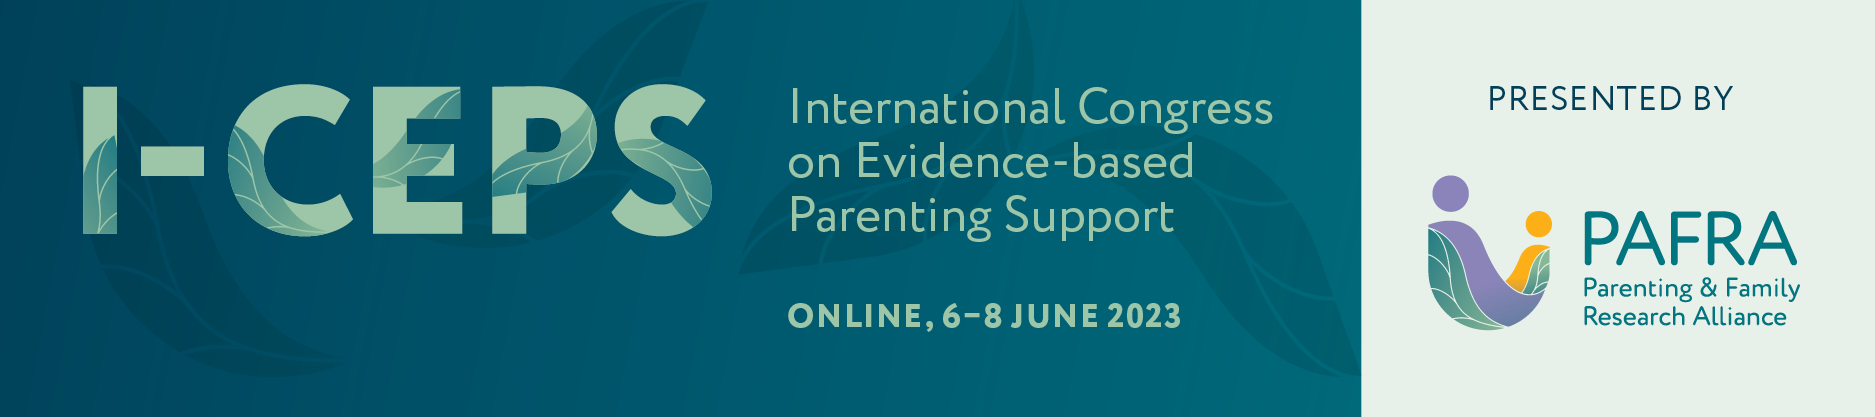 Global meeting aims to improve evidence-backed parenting and public policy